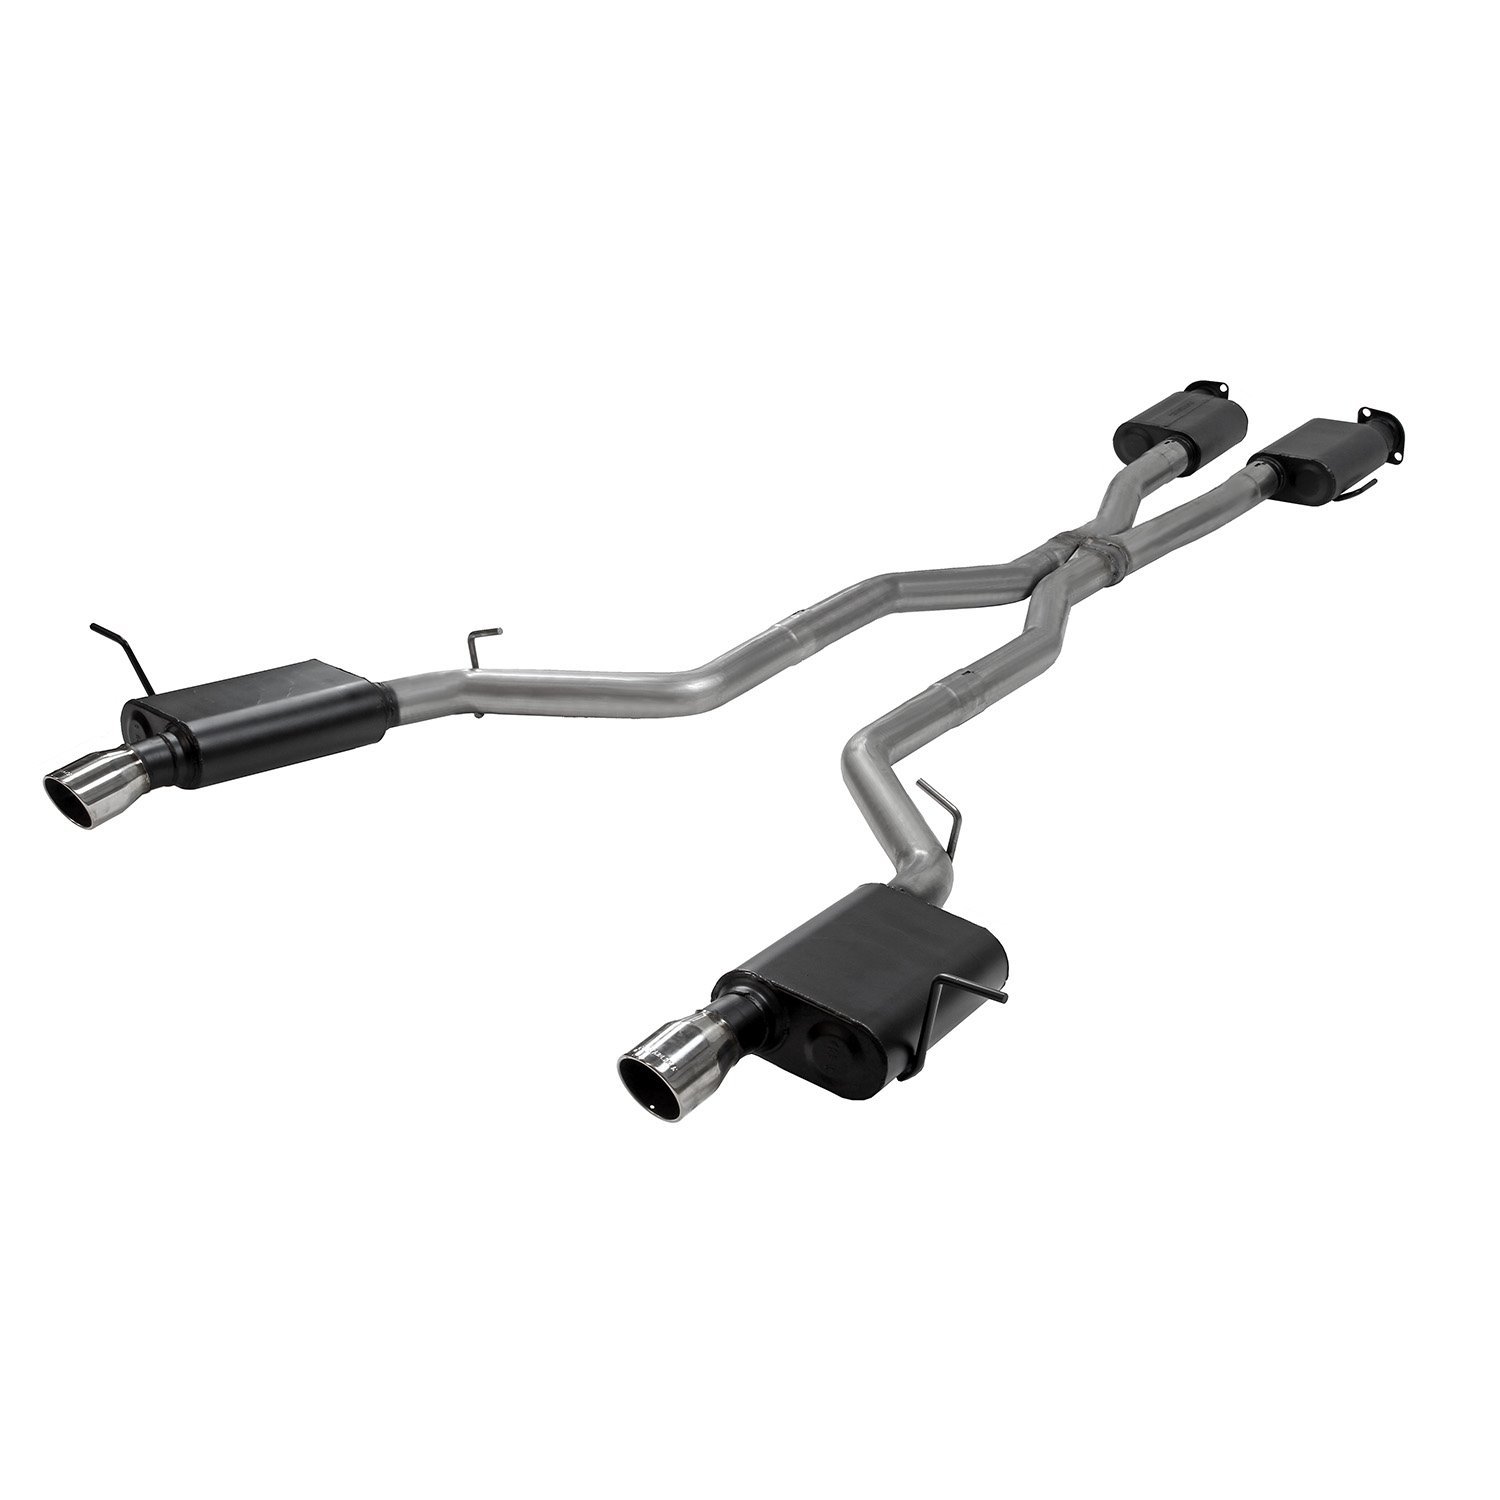 American Thunder Cat-Back Exhaust System Fits Select Dodge Durango 6.4L